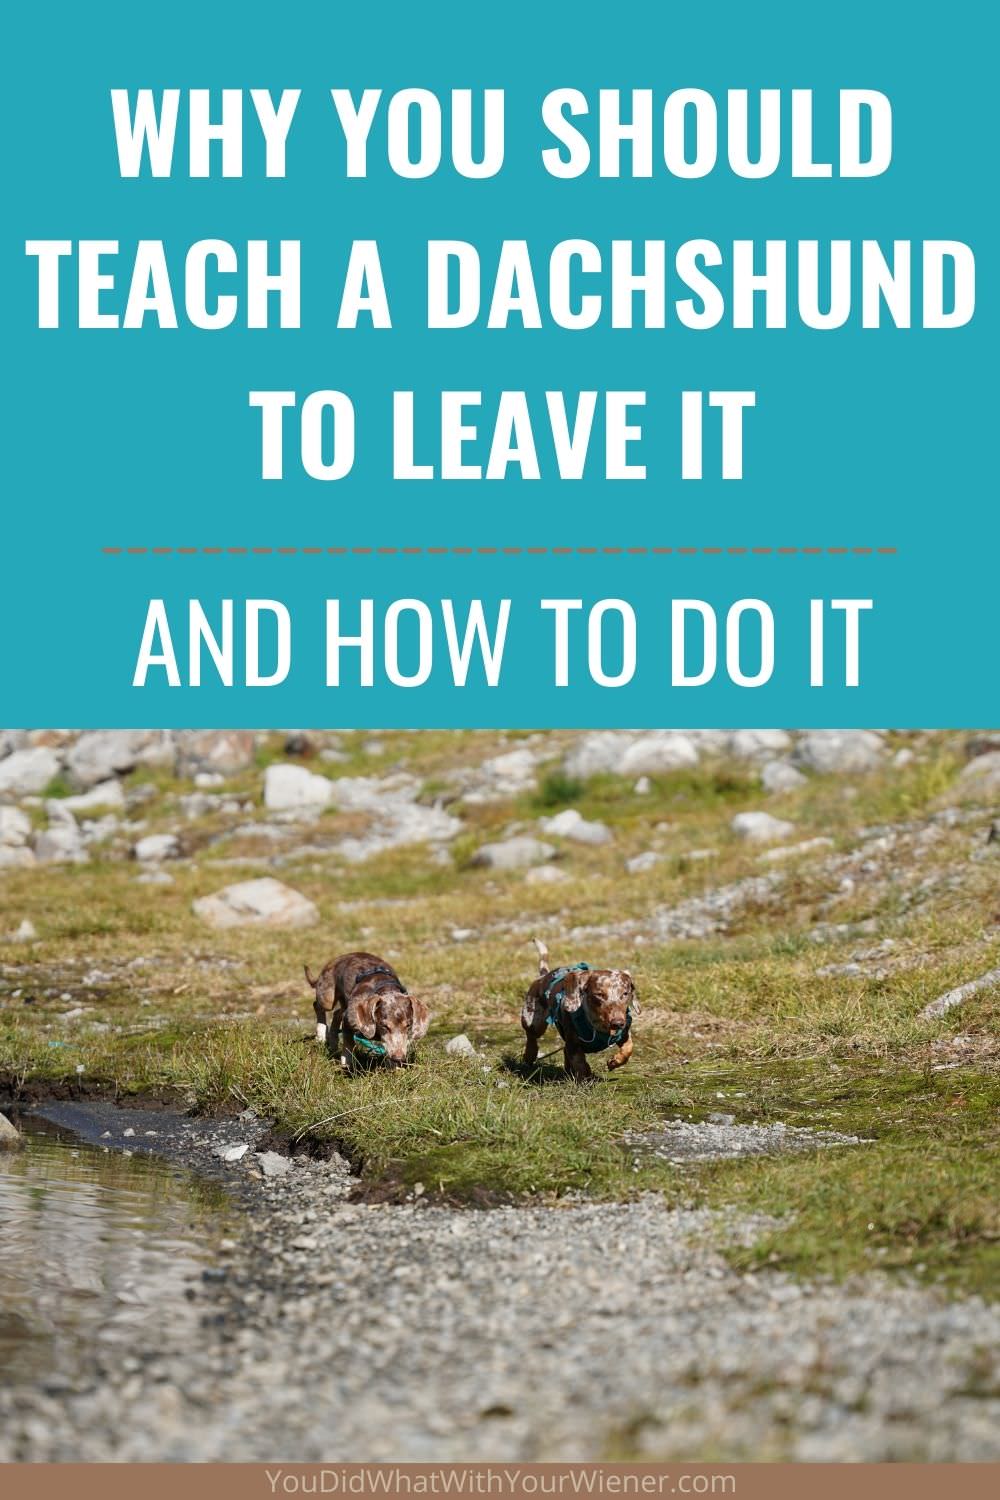 Does your dog know how to leave it? Here's how to teach a Dachshund to leave it and how you can do it.